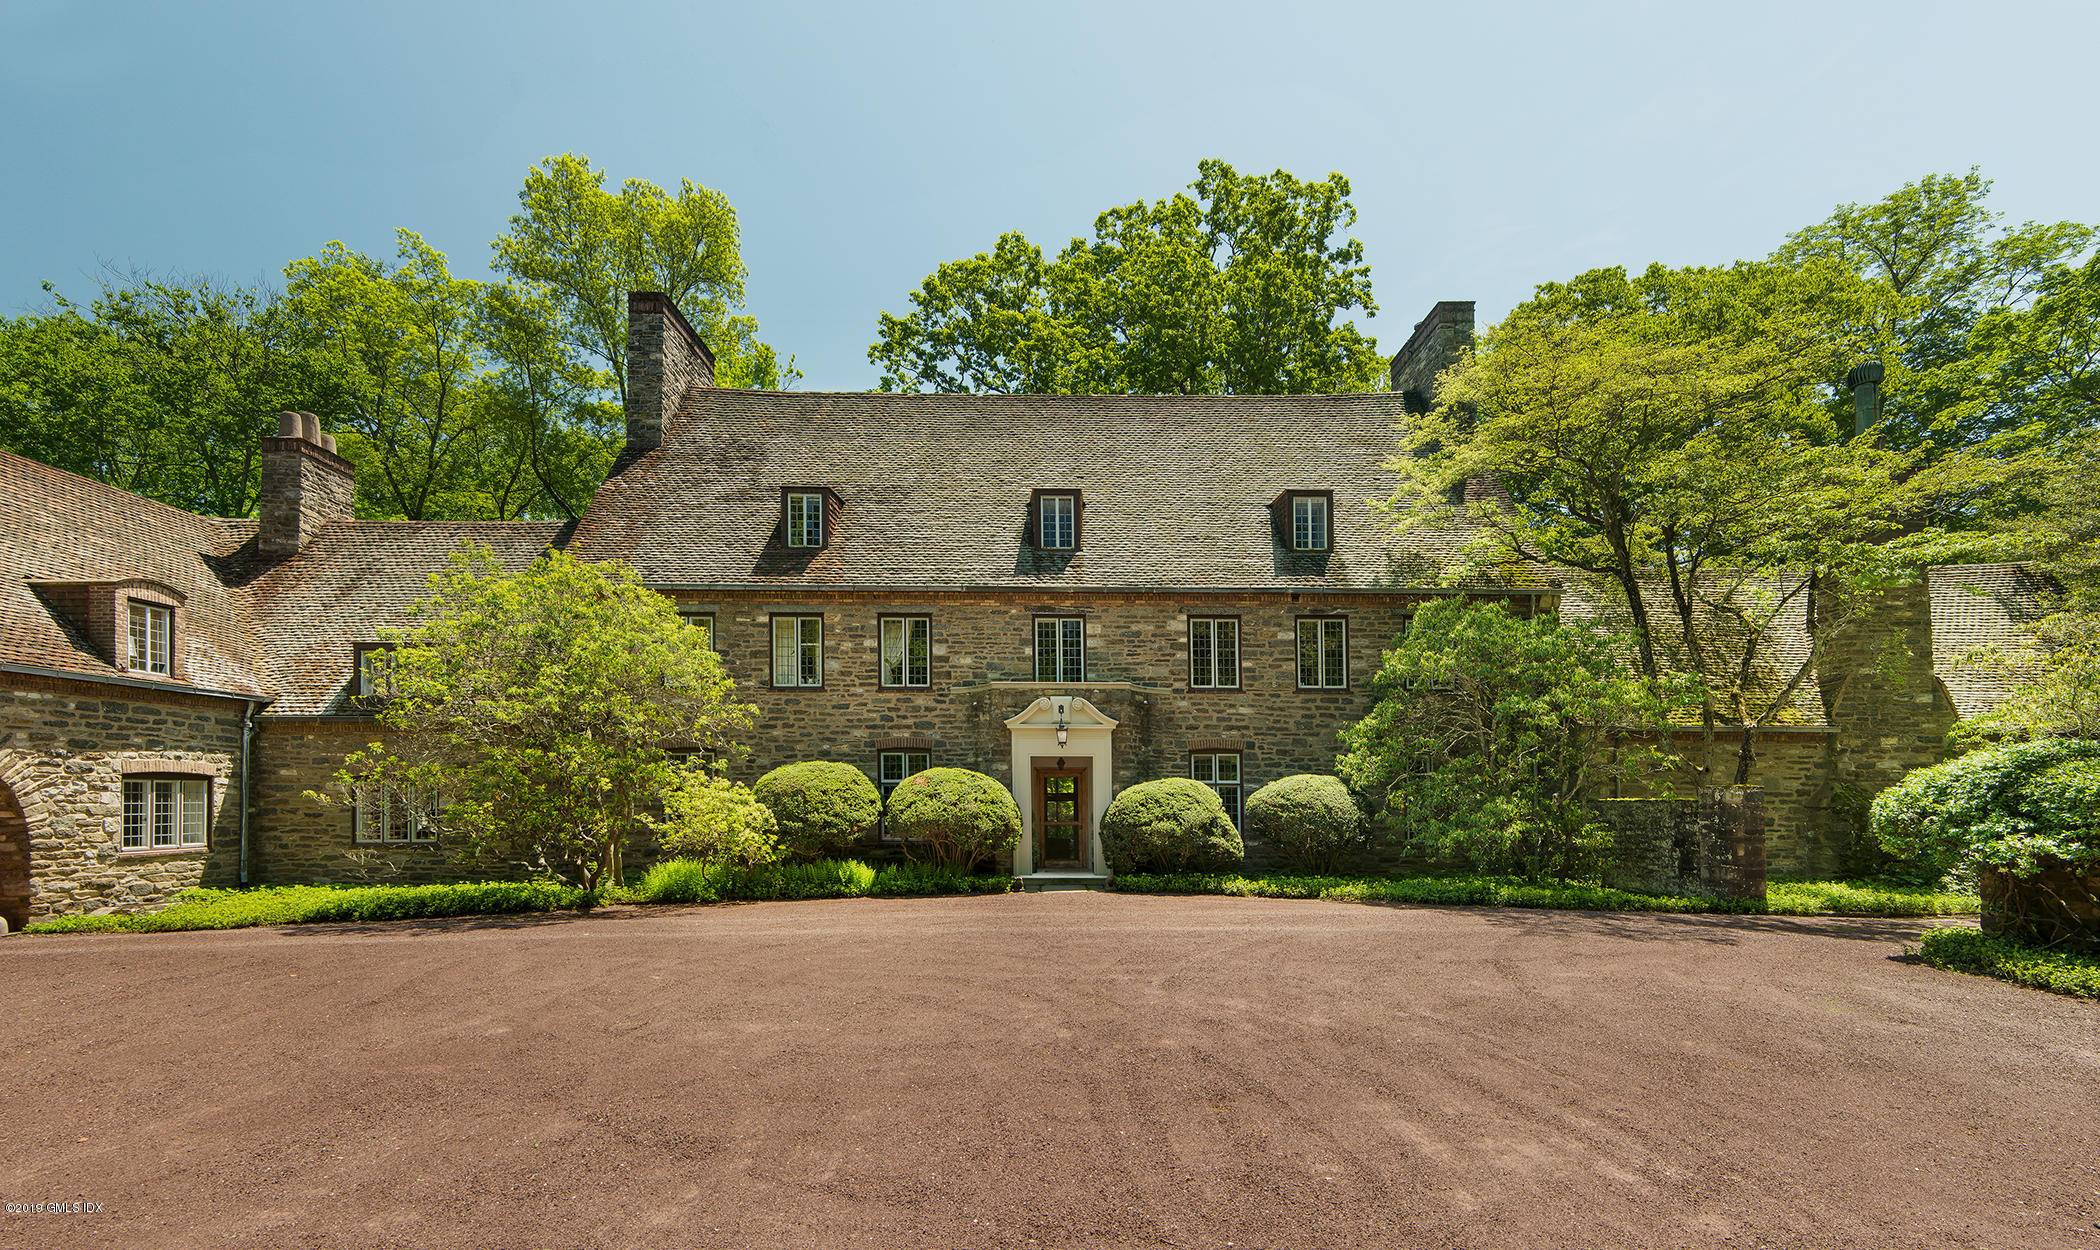 On nearly 9 acres in prime mid country Greenwich's private Khakum Wood Association, a manor home designed by the renowned American architect Harrie T.